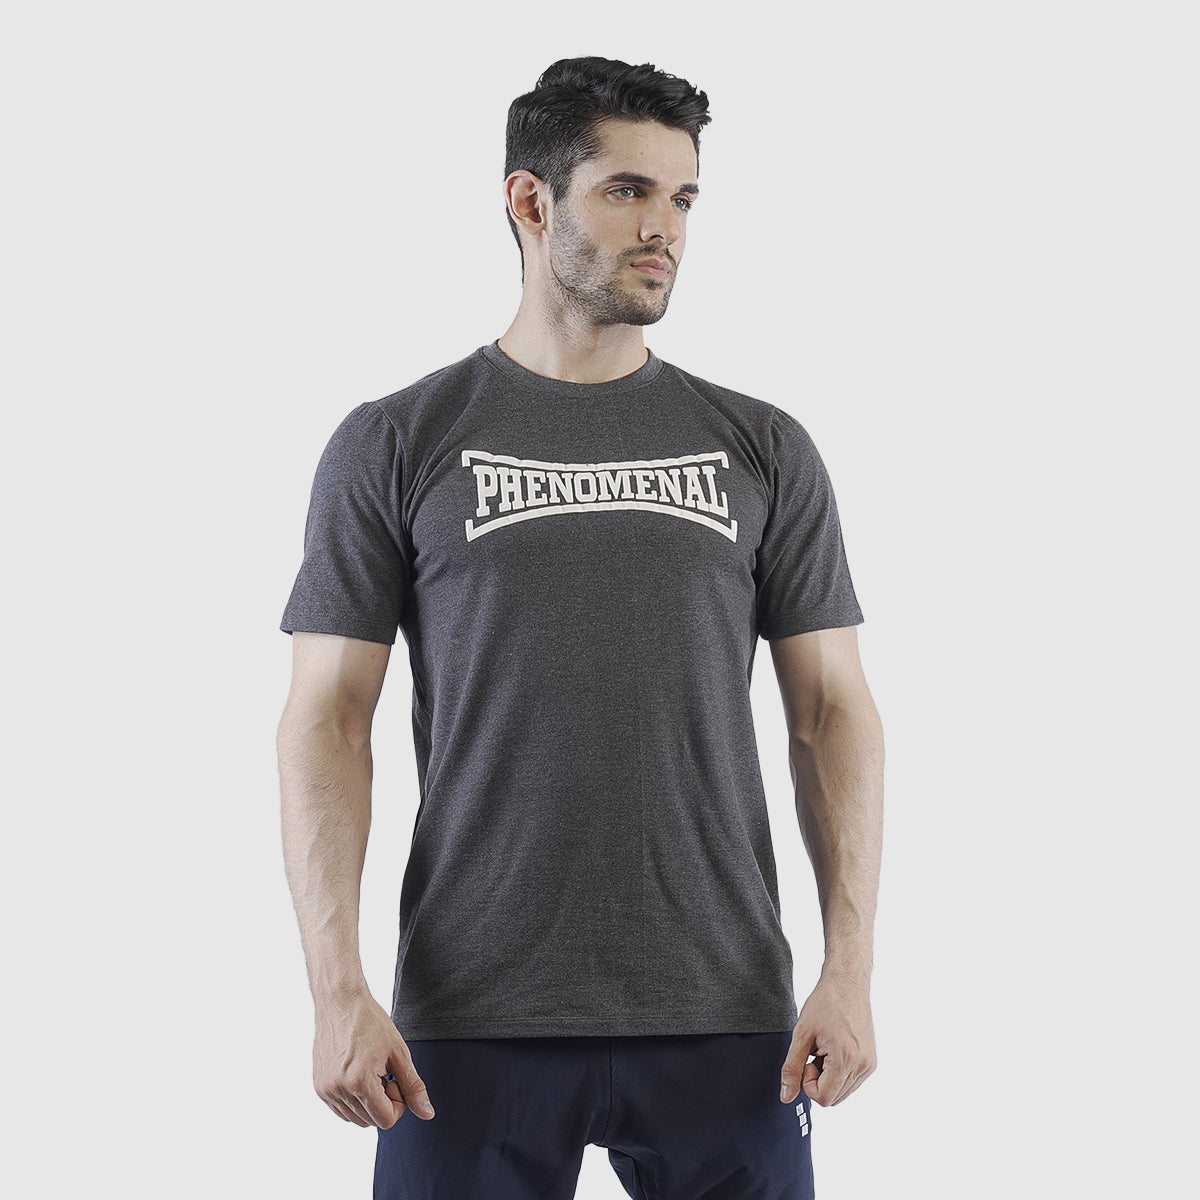 Phenomenal Loose Fit Tee (Charcoal)